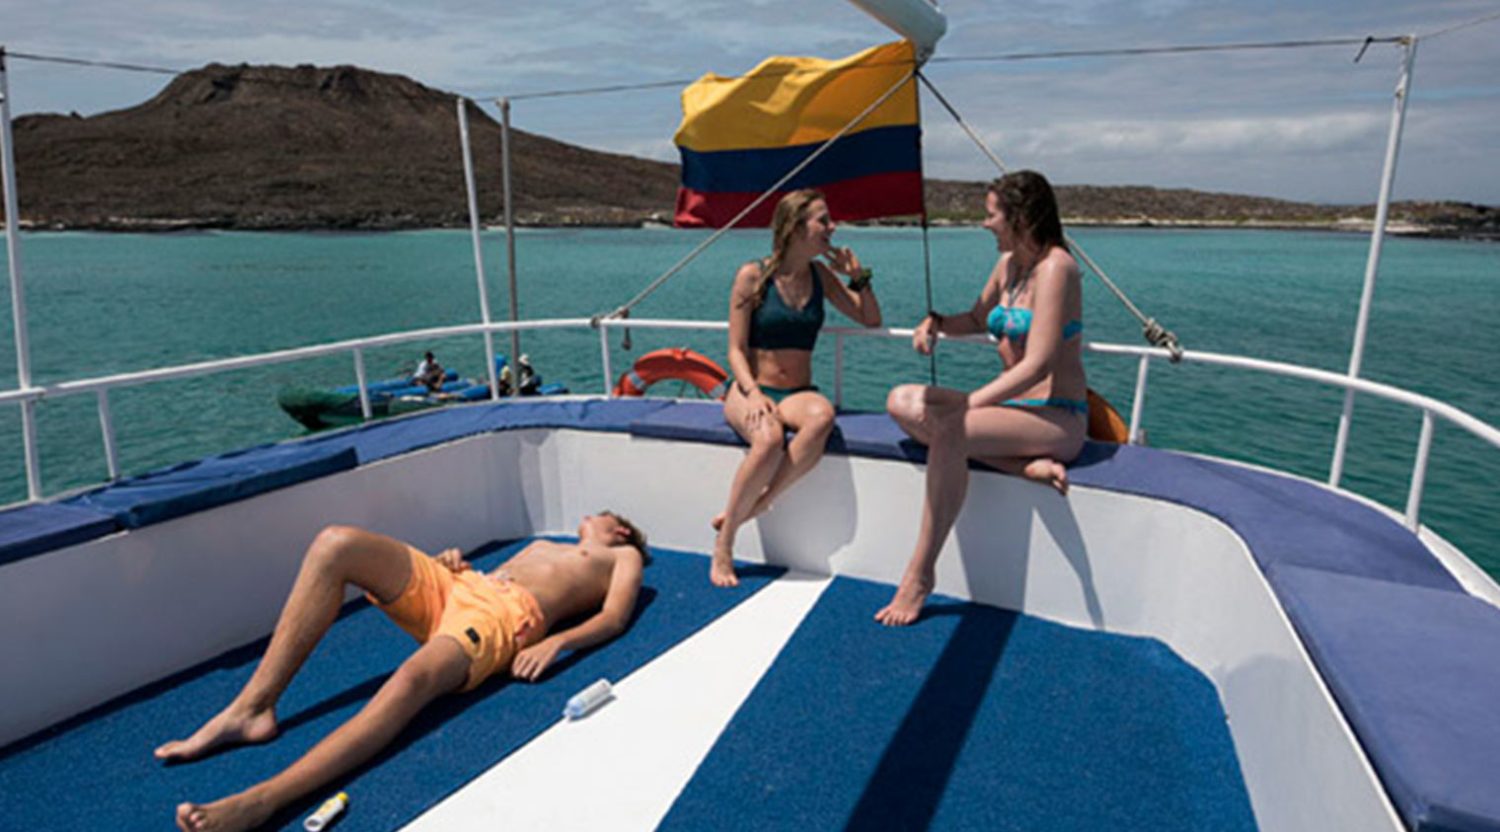 tourists getting tanned in the deck of golondrina yacht of galapagos islands